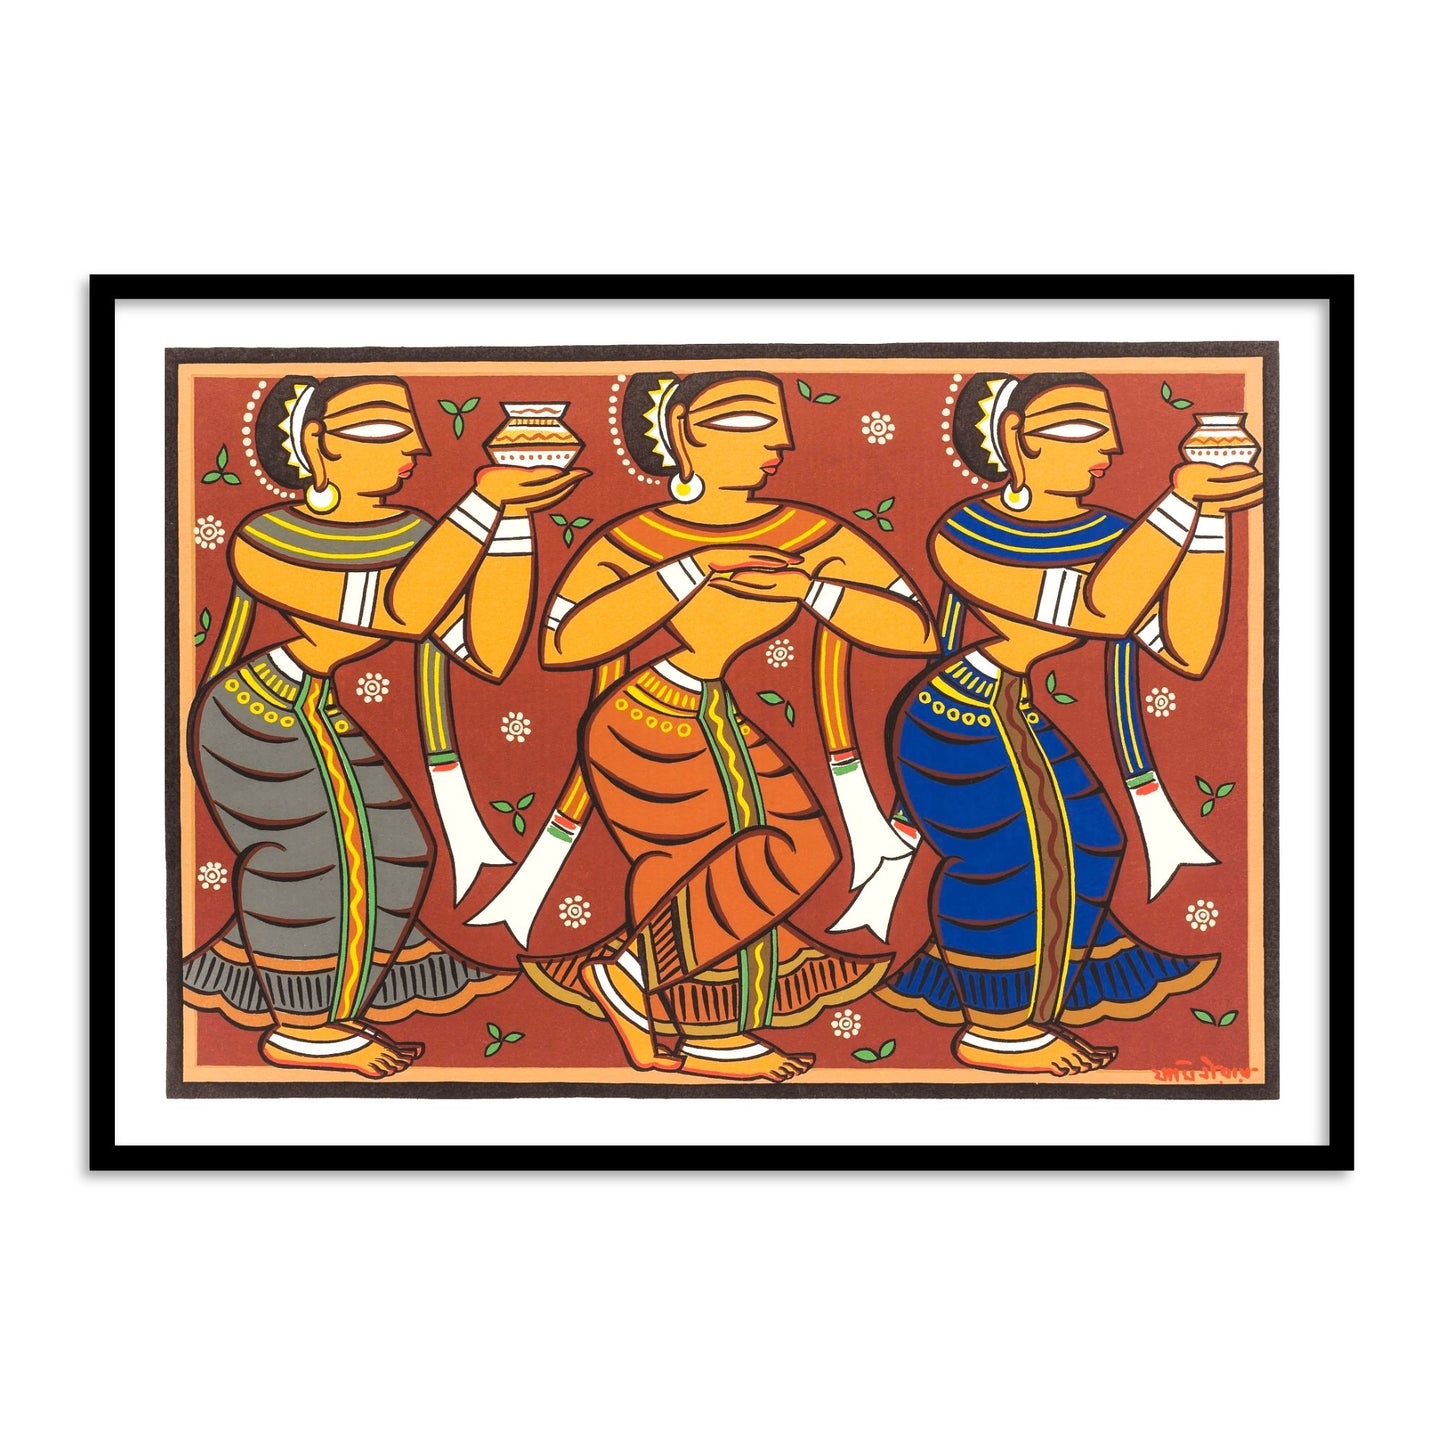 Untitled (Gopini) Wall Art Painting Print by Jamini Roy for Home Decor